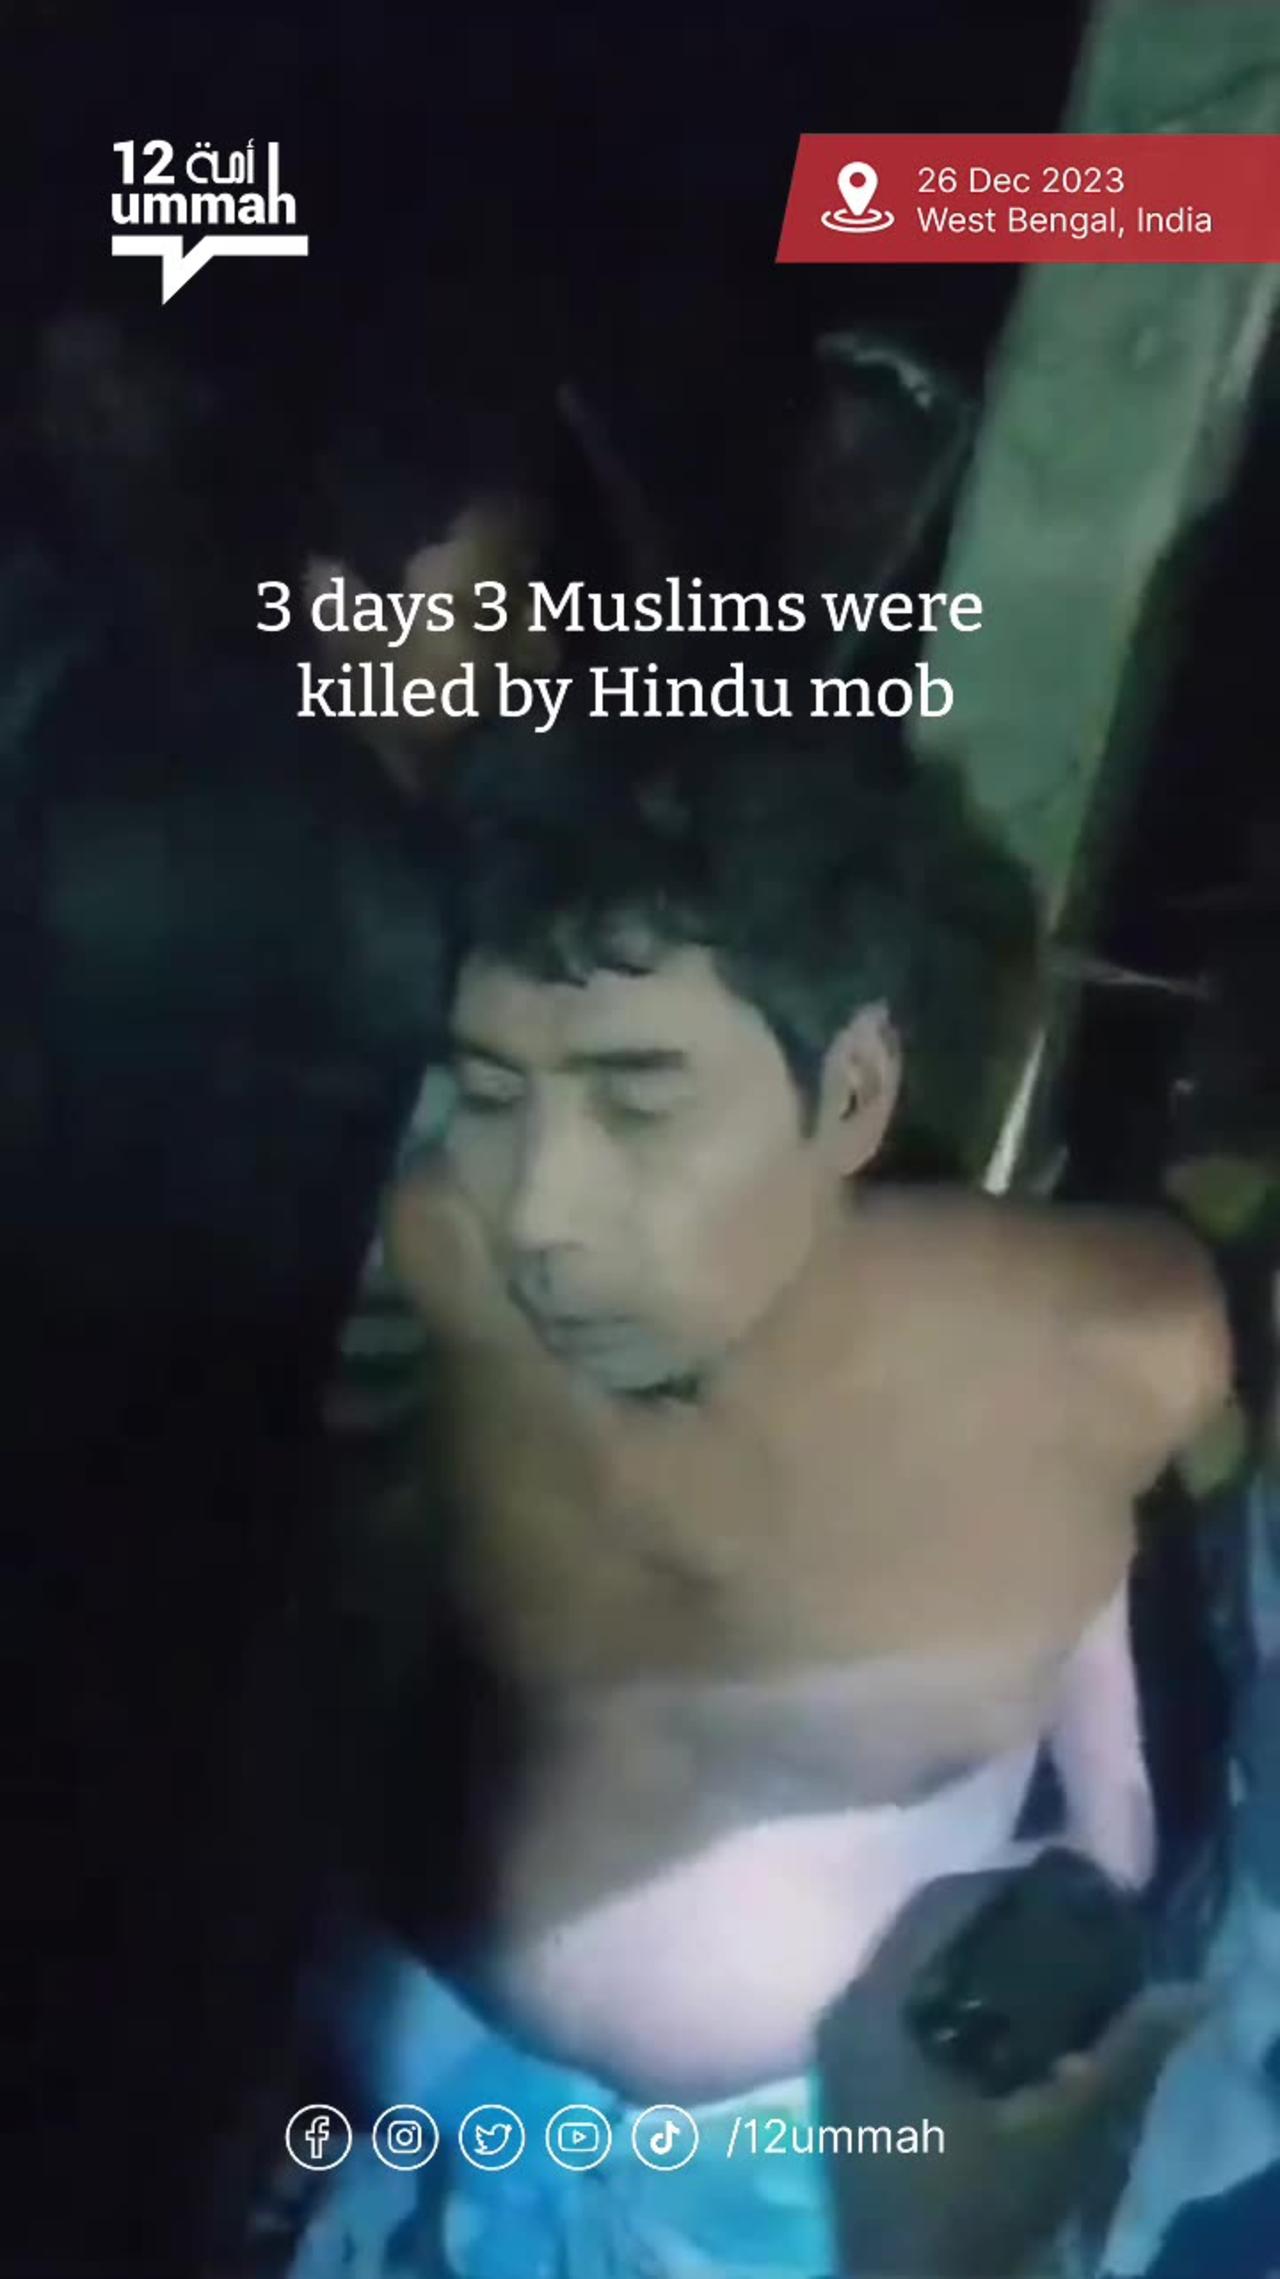 3 Muslims lynched to death in 72 hours